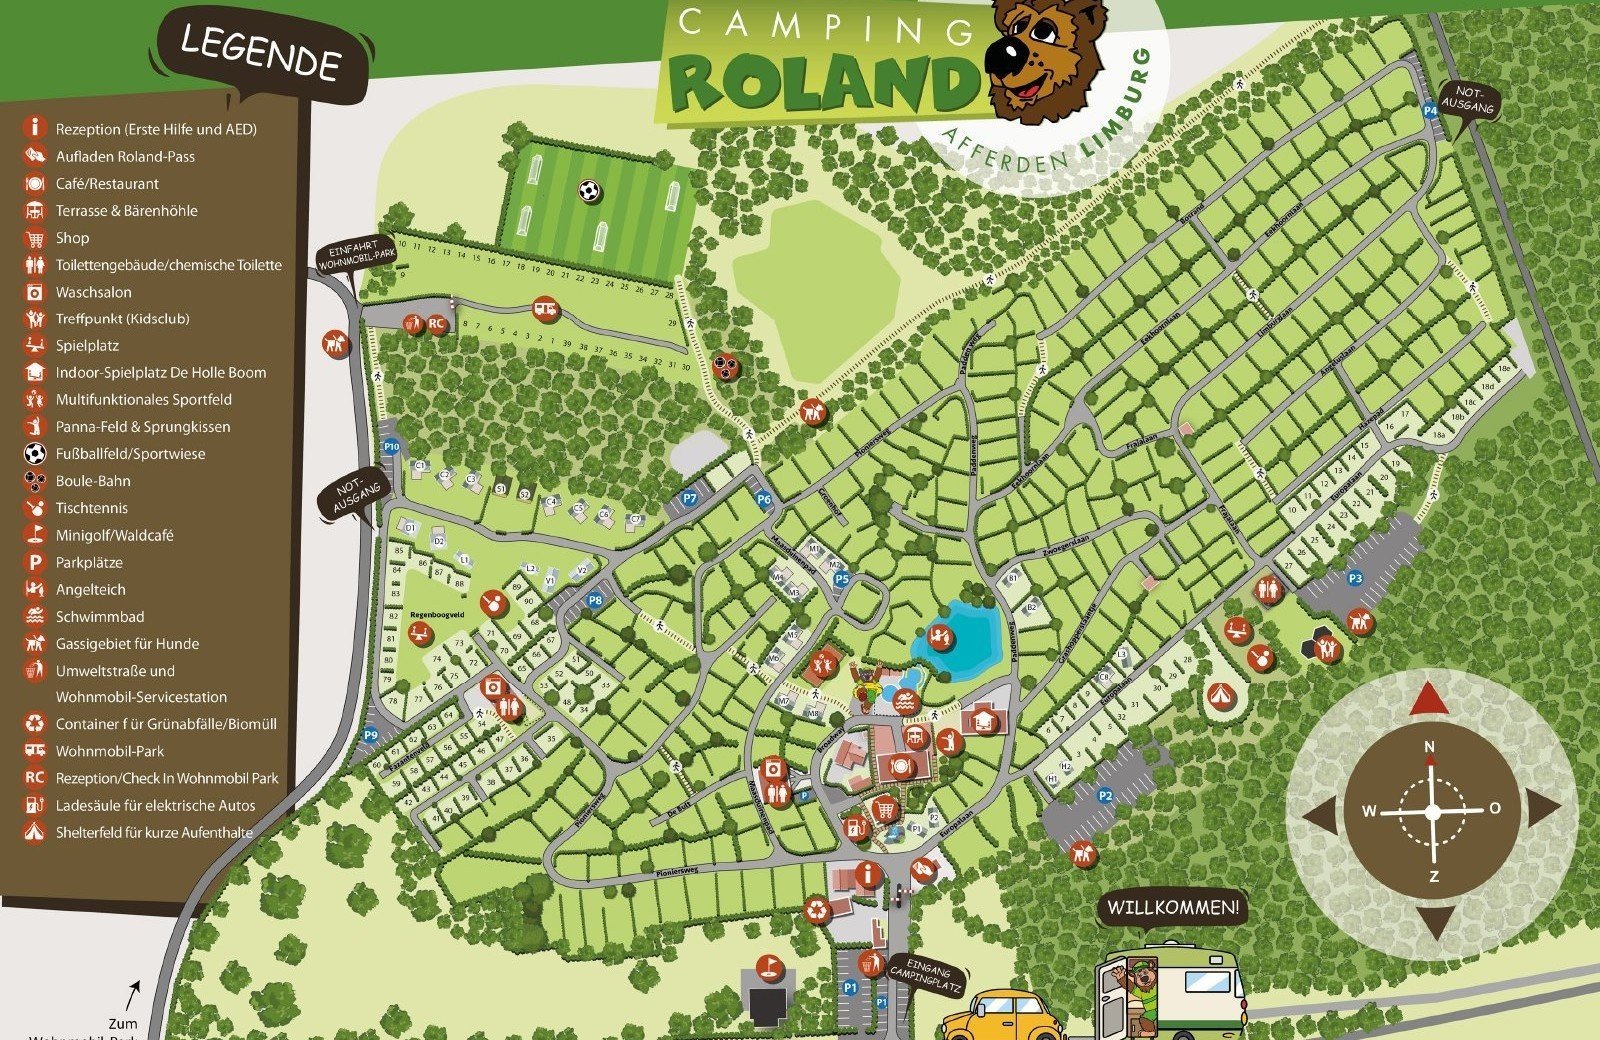 Camping Roland